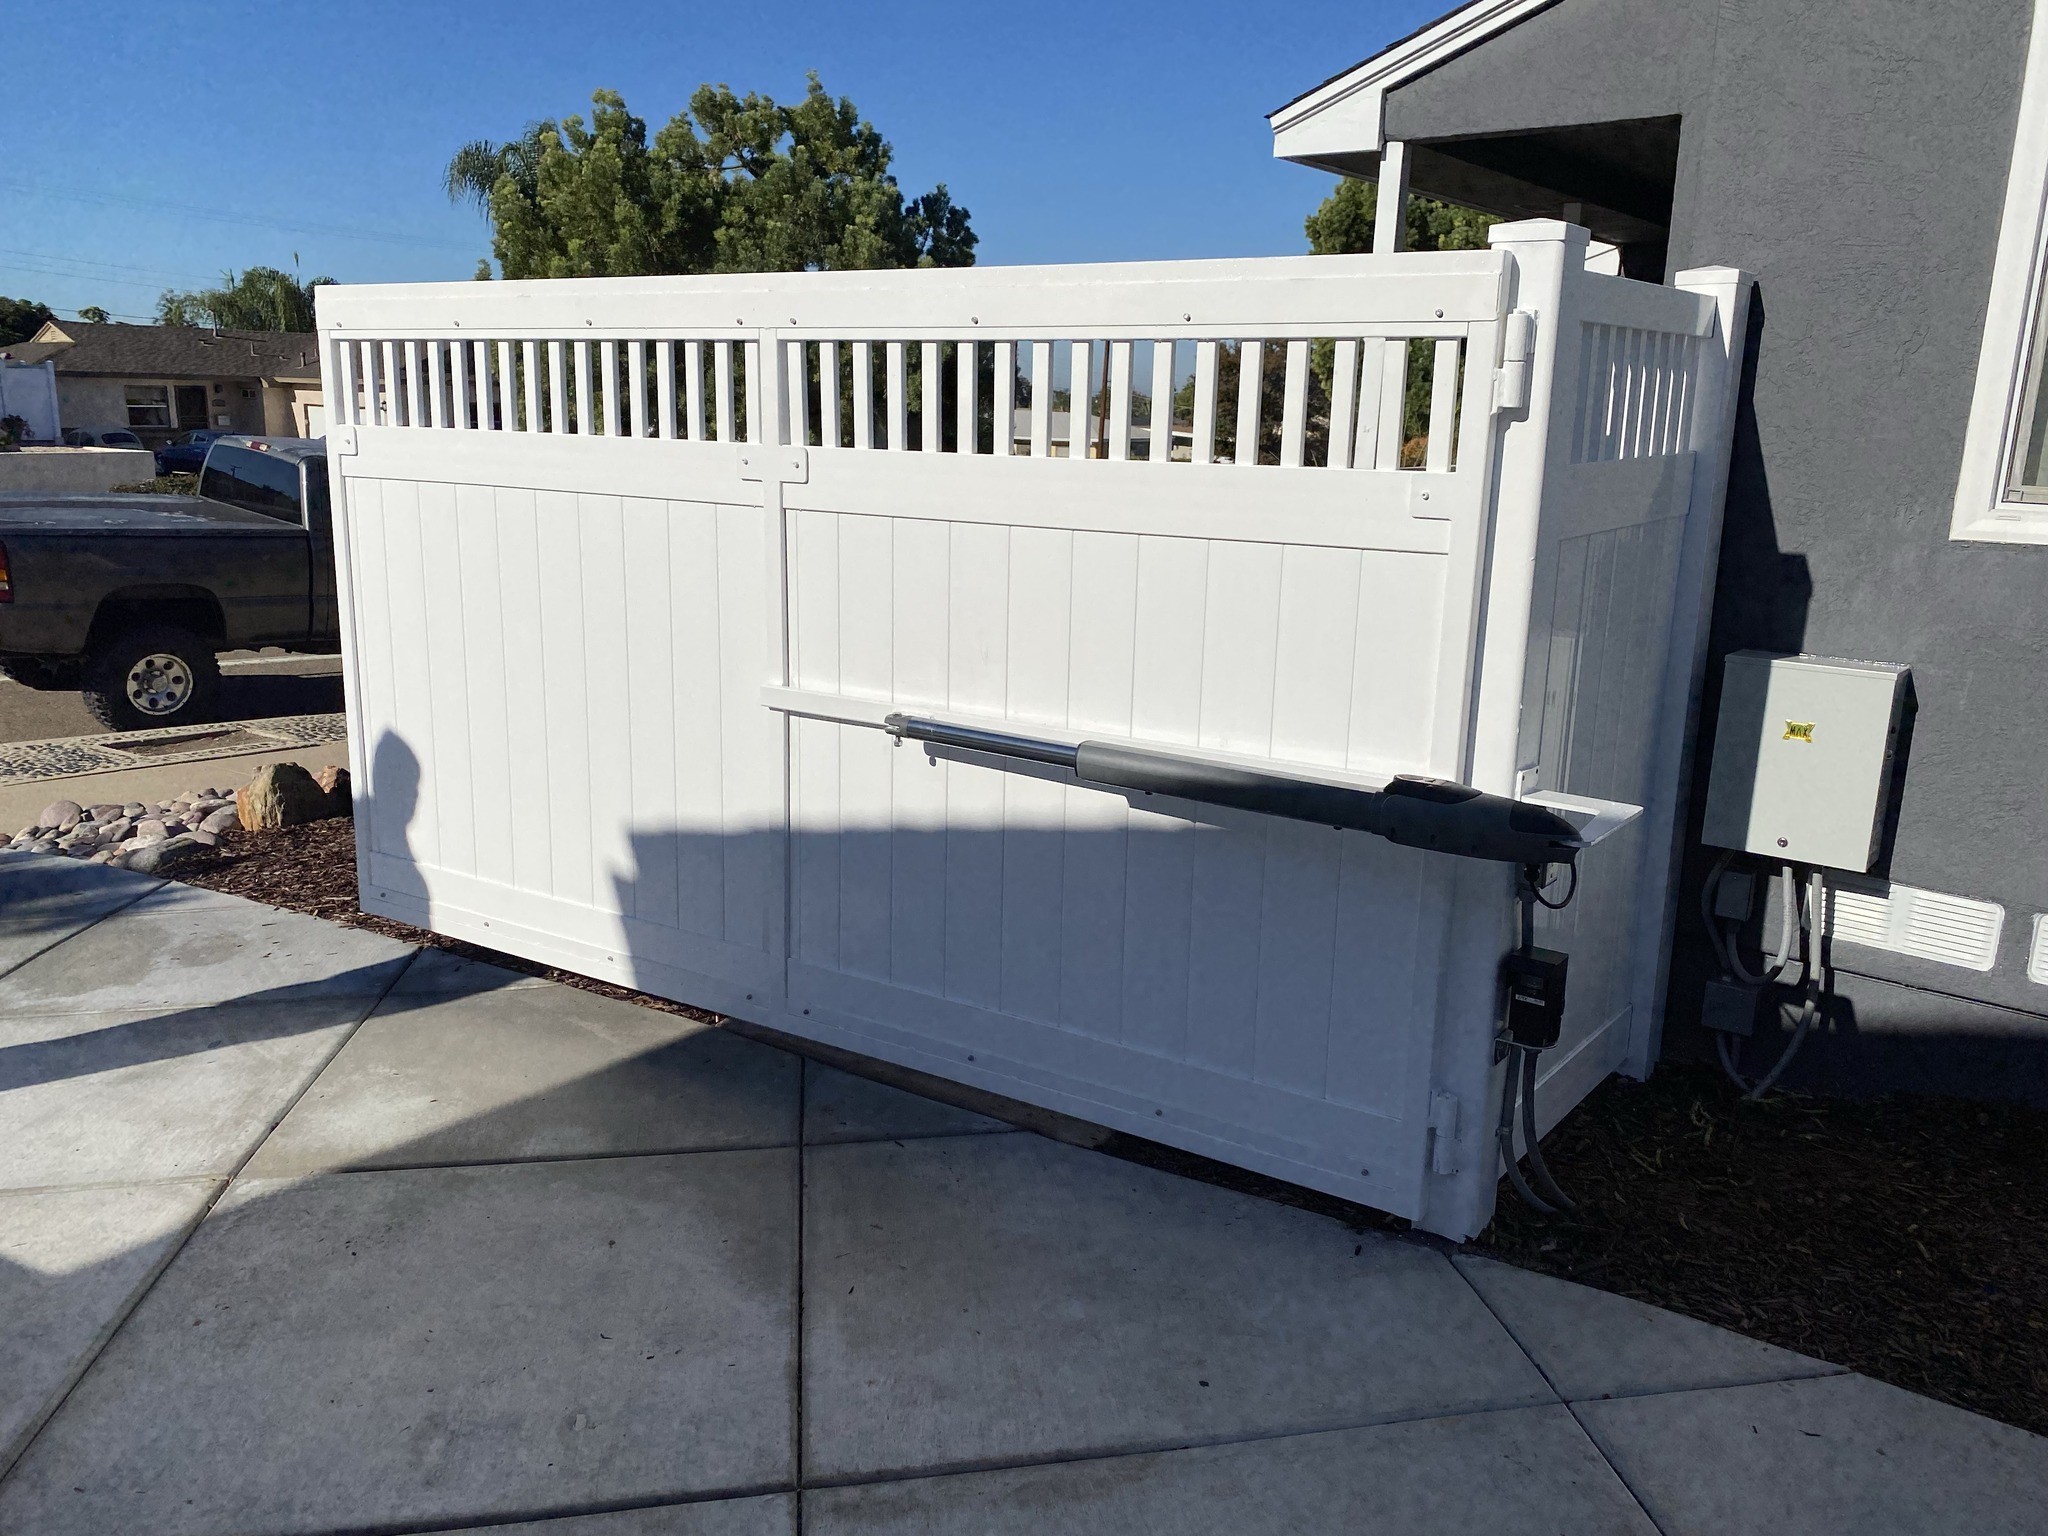 Automated Gate Install & Repair Service in San Diego, CA